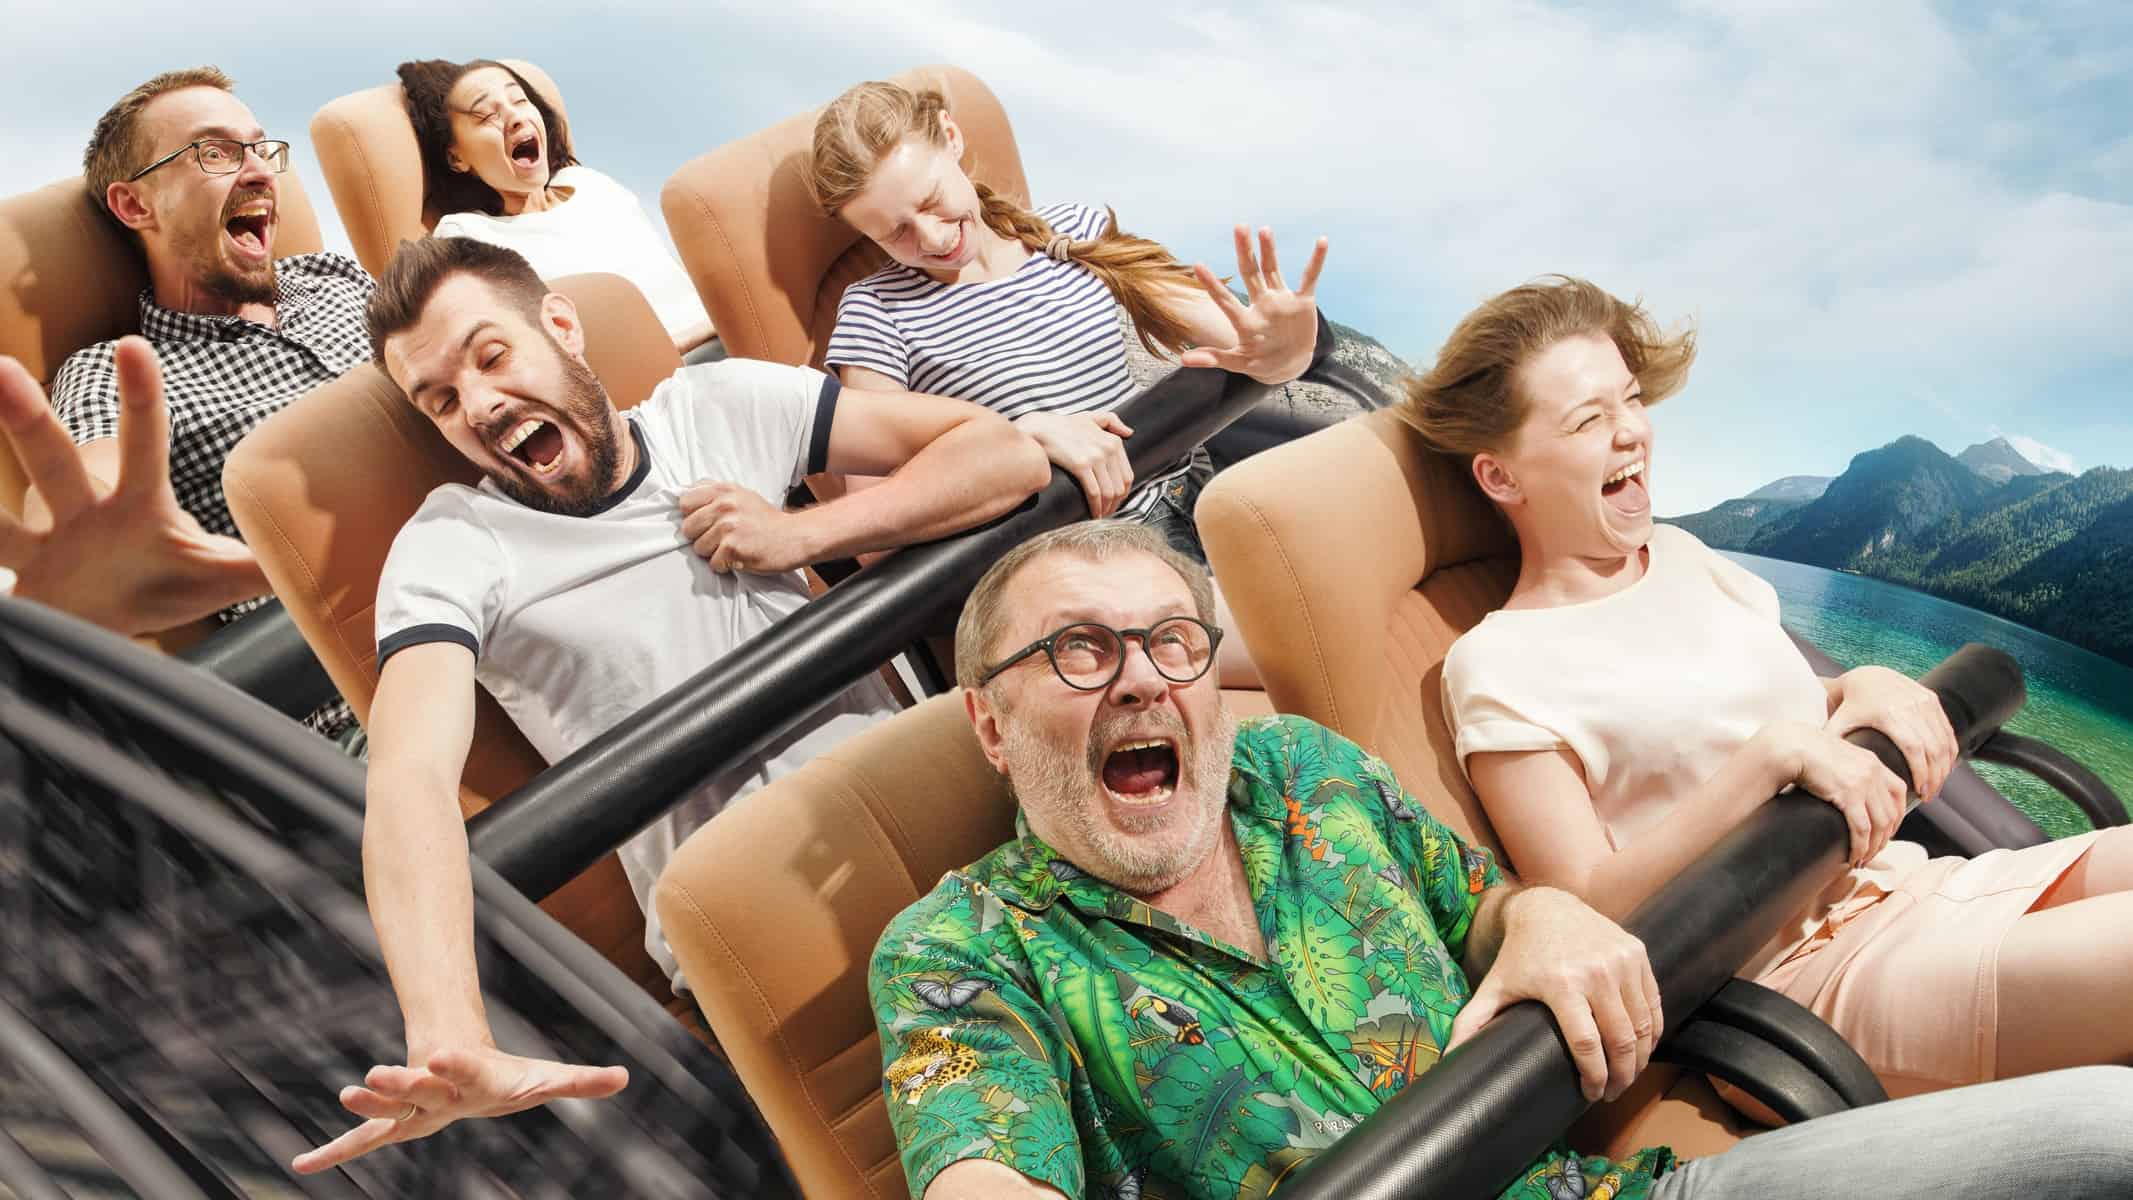 people with crazy faces of fear, terror and exhileration clutch at a rollercoaster as it goes into a steep downward descent